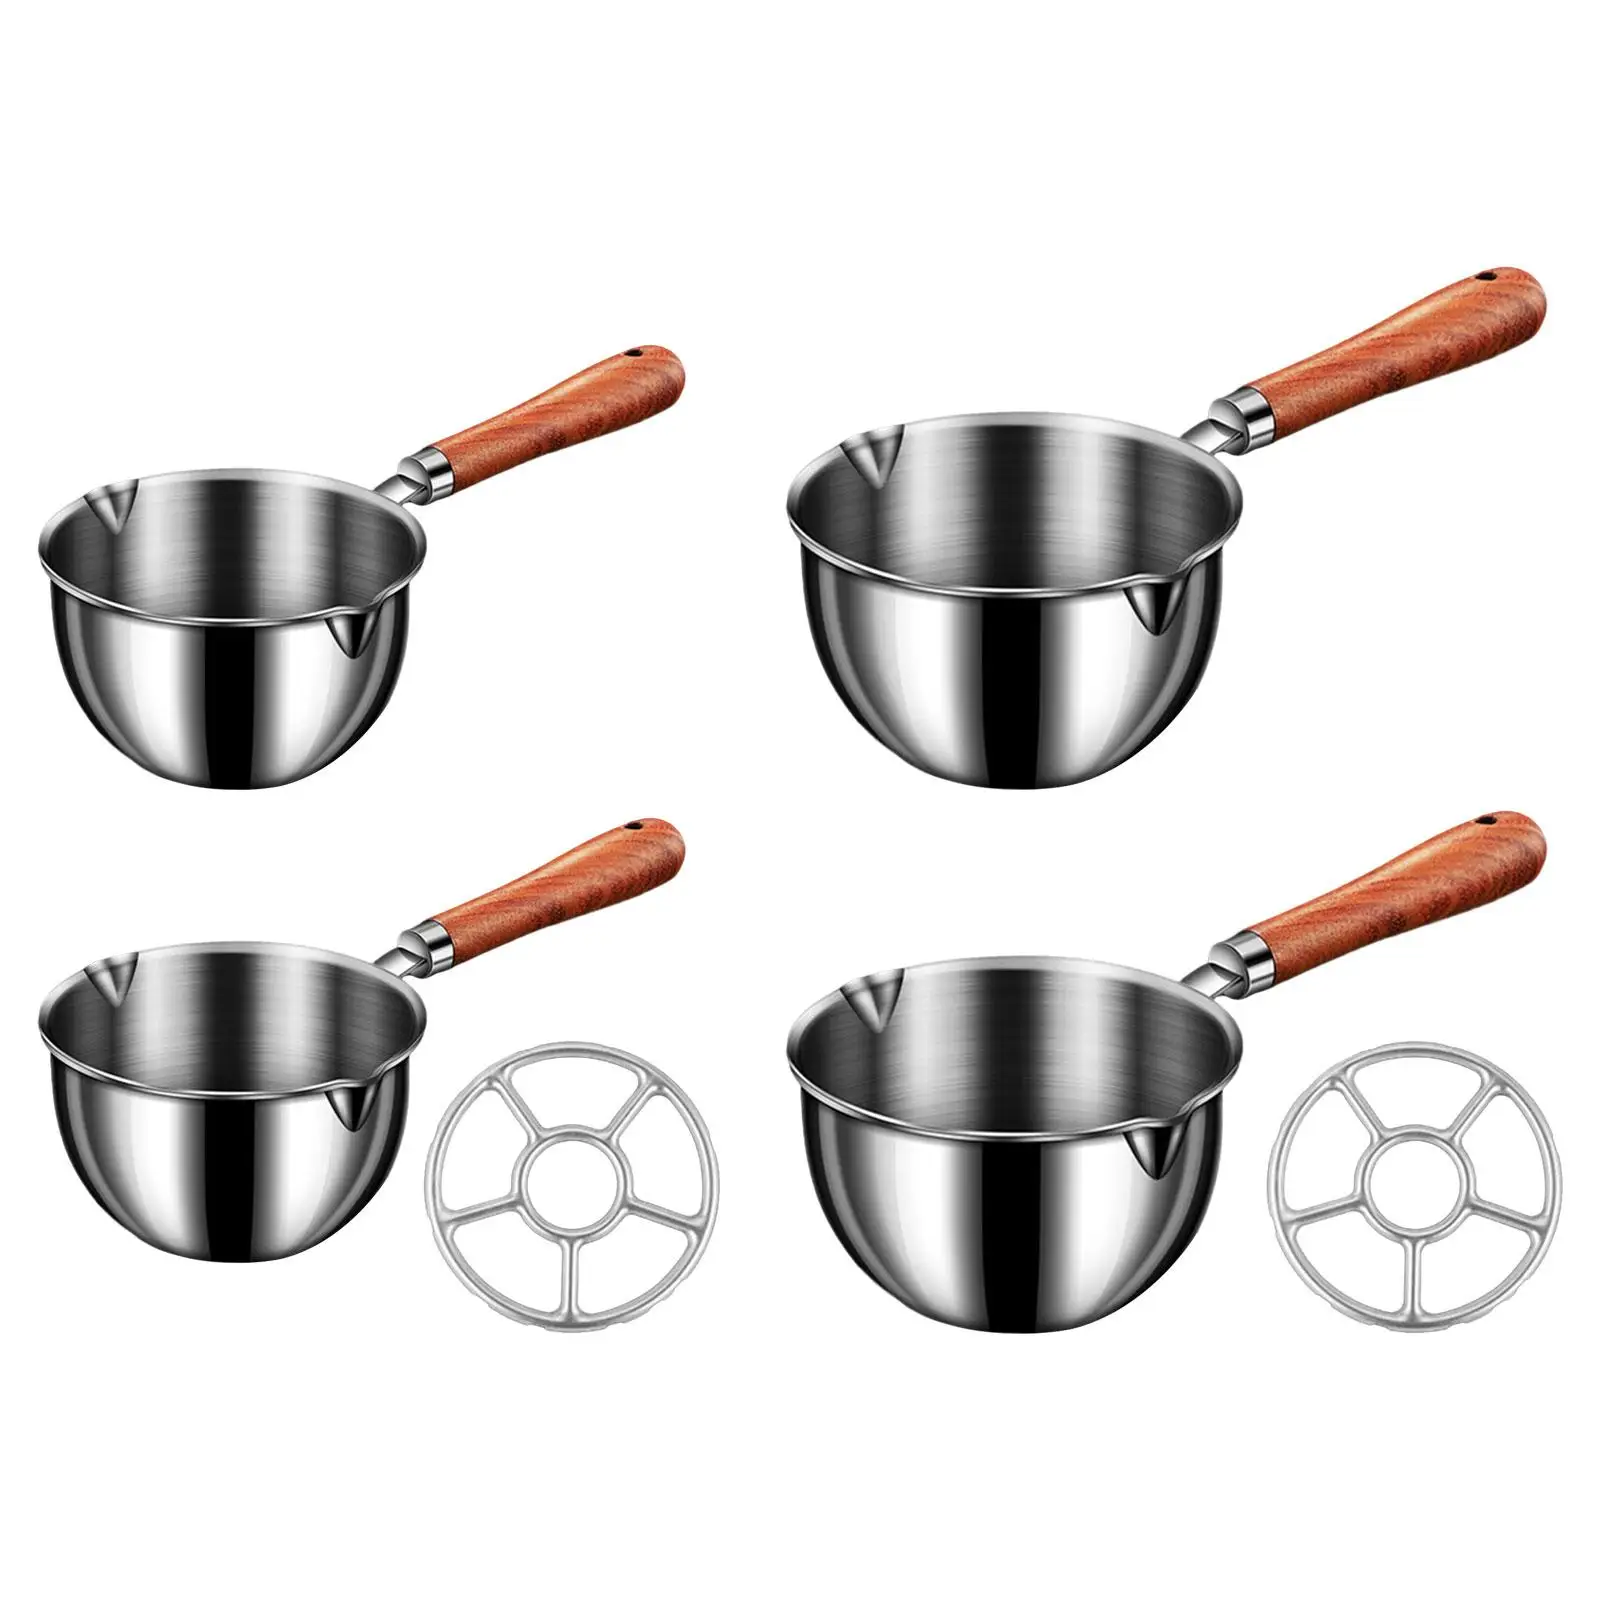 Stainless Steel Saucepan Pot with Dual pour spouts for Chocolate Melting